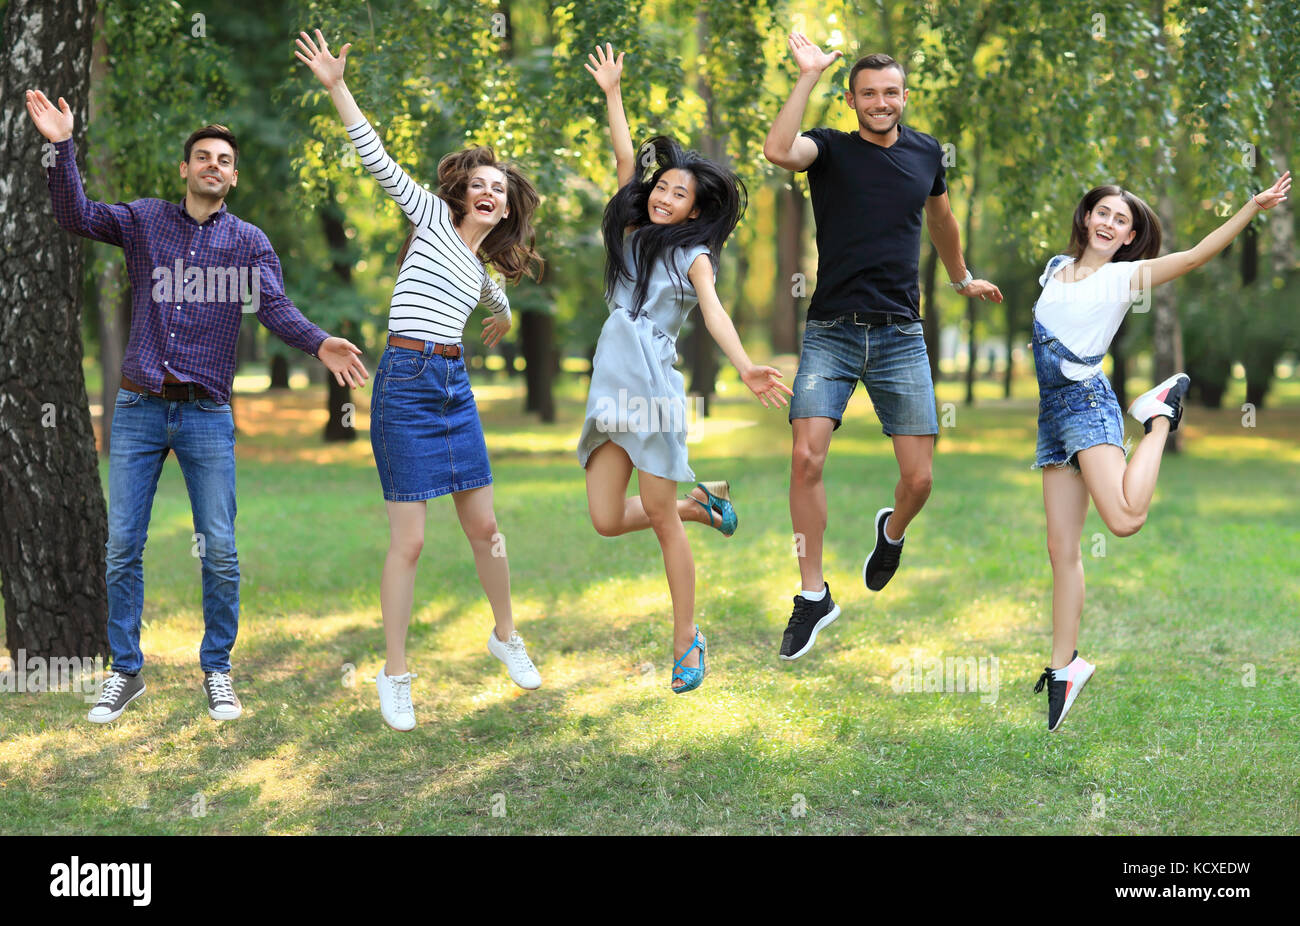 Five happy friends young women and men jumping outdoors. Cheerful people having fun in park on sunny day. Freedom, victory, action, healthy lifestyle  Stock Photo